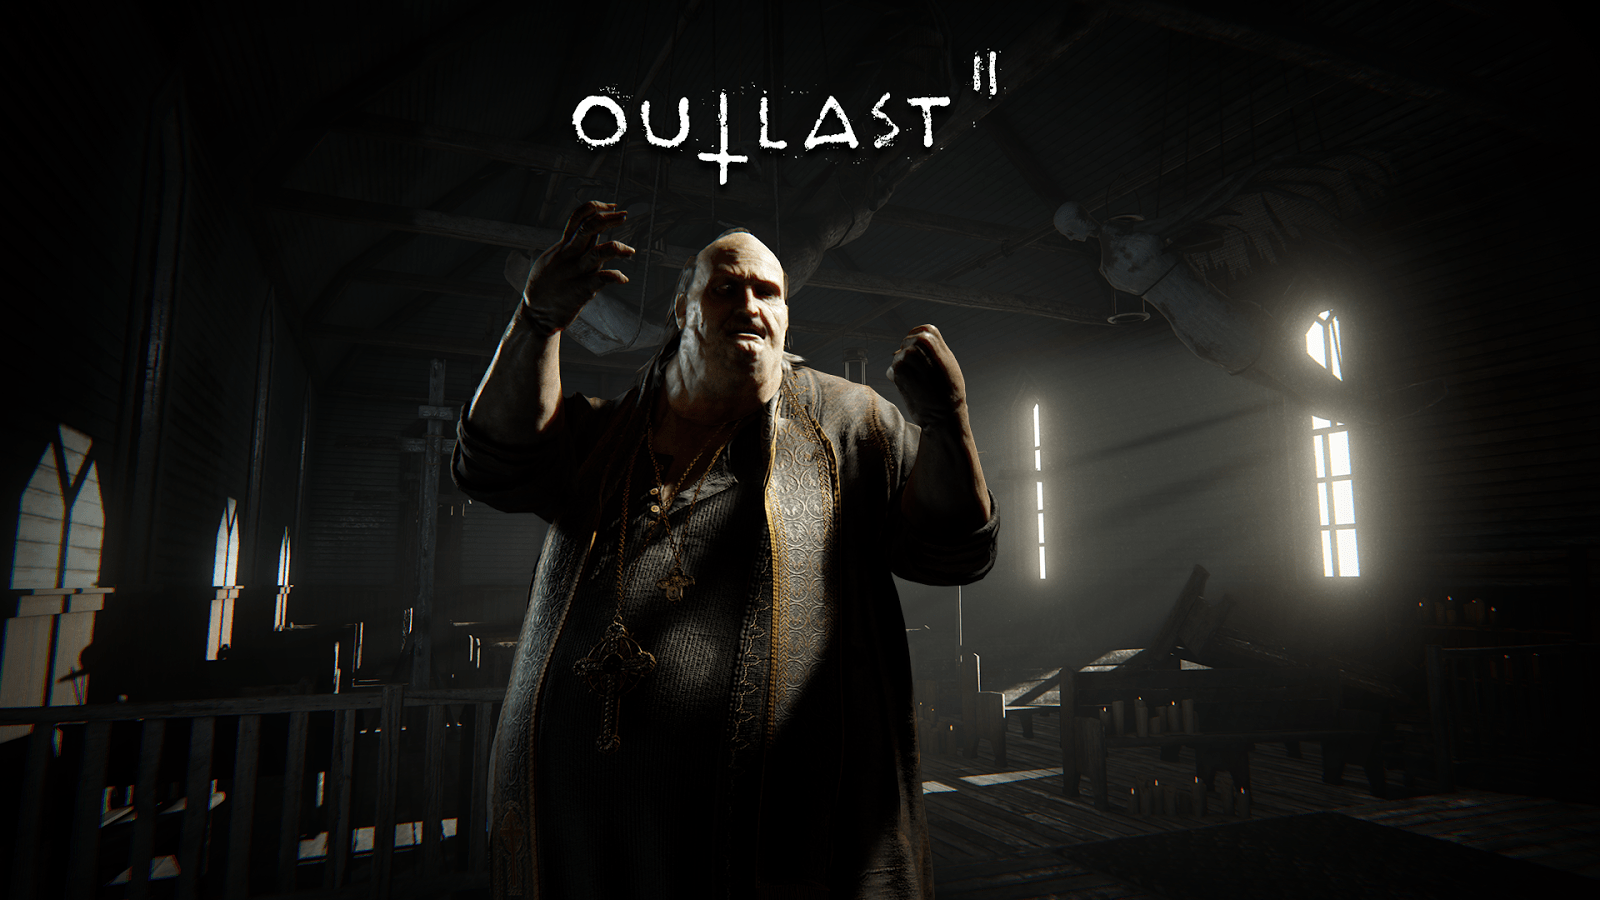 outlast 1 download free